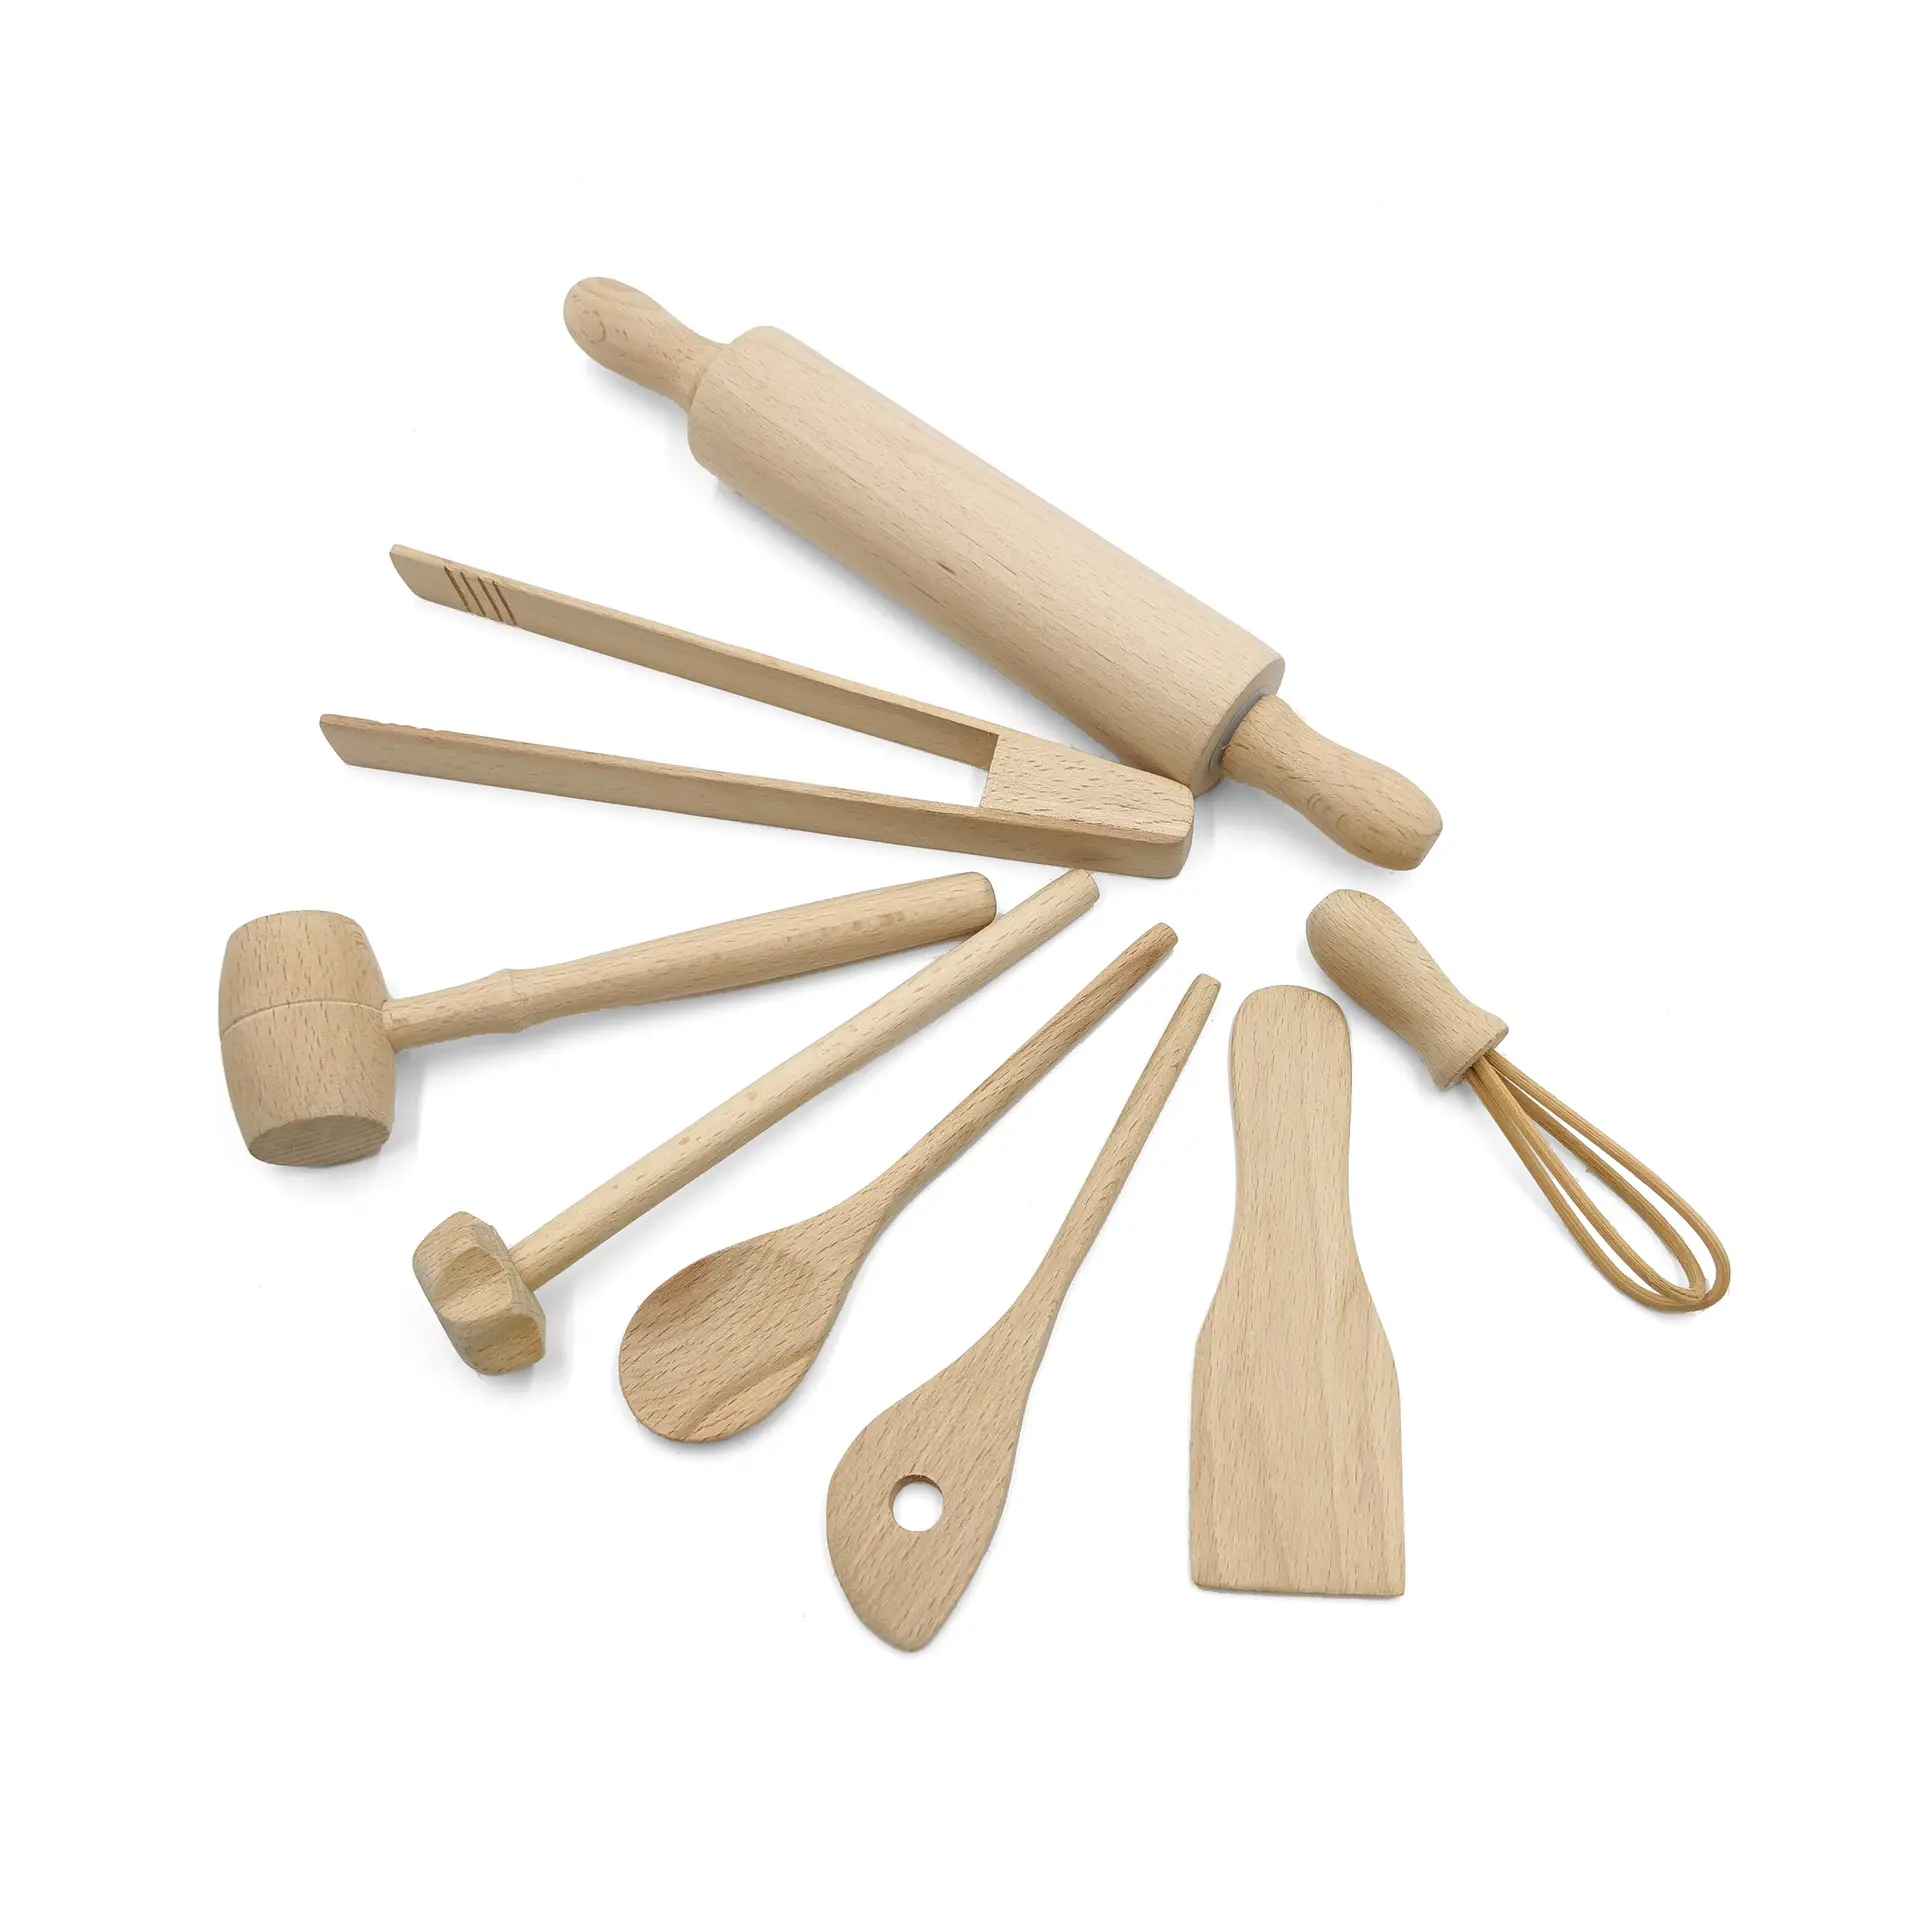 Beech kids play house kitchen toys kitchen supplies, baby rolling pin, mini wooden spoon wooden spatula eggbeater